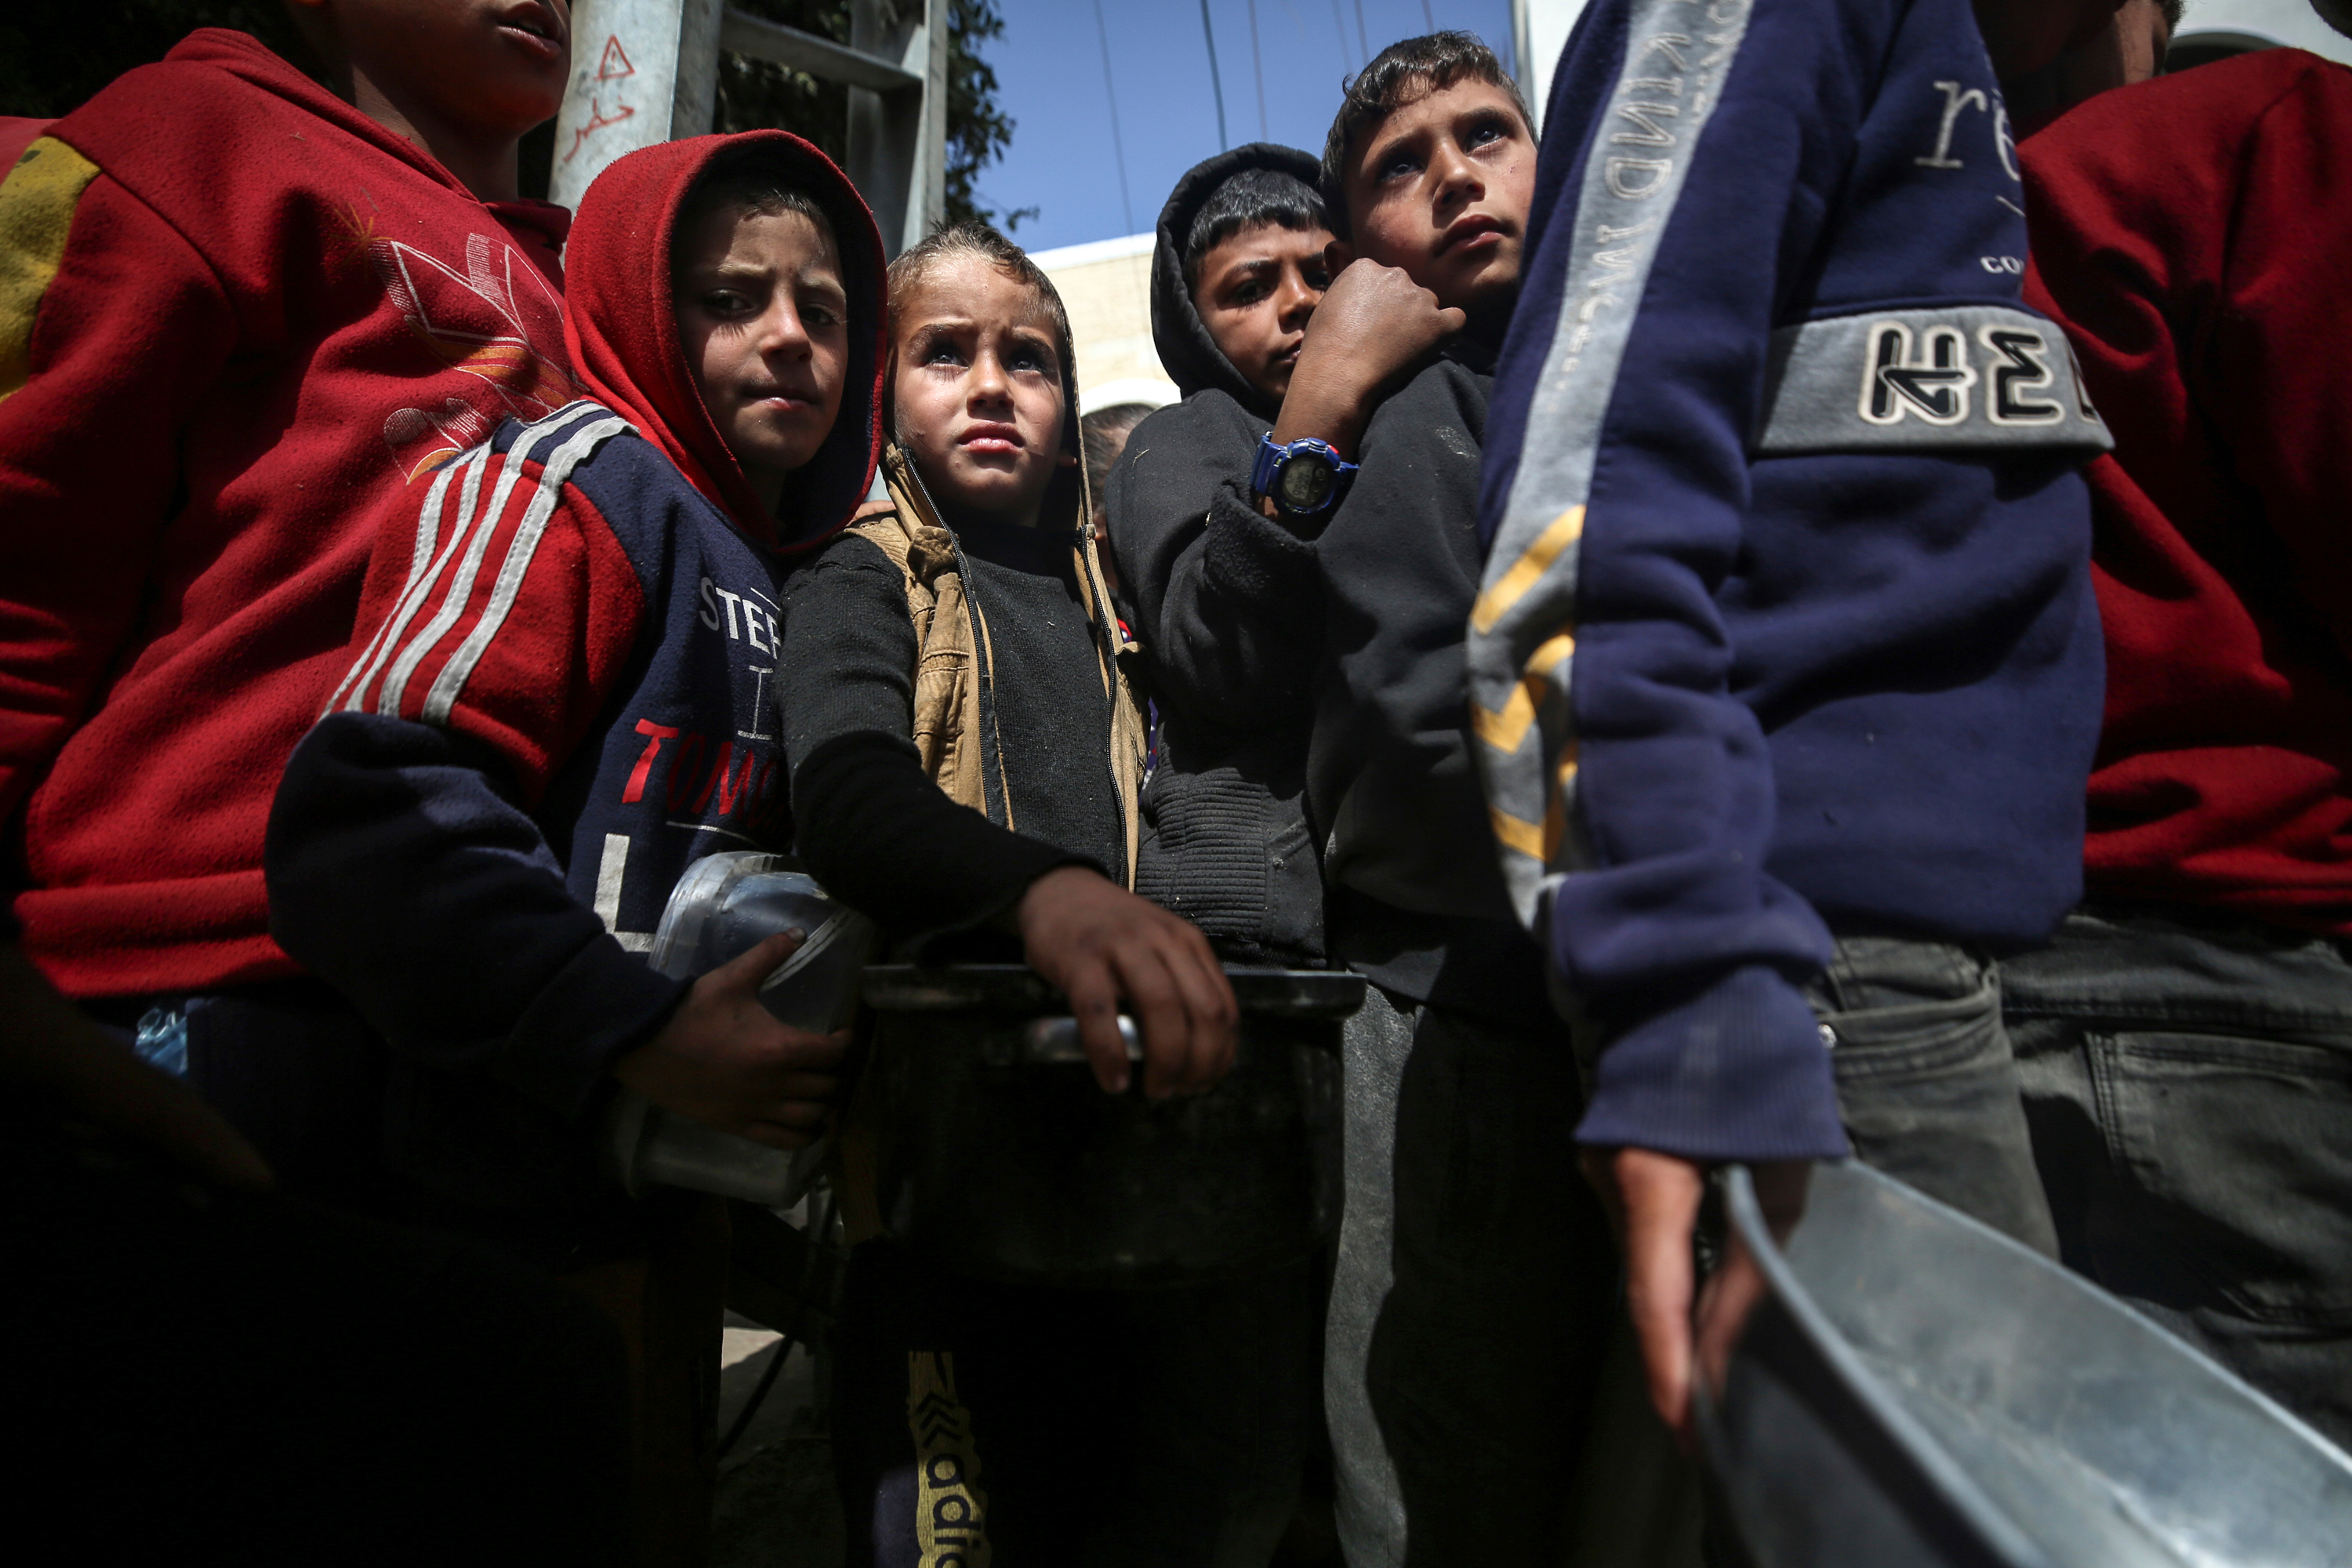 Children gather to receive food at a donation point in Deir al-Balah, Gaza on March 6.